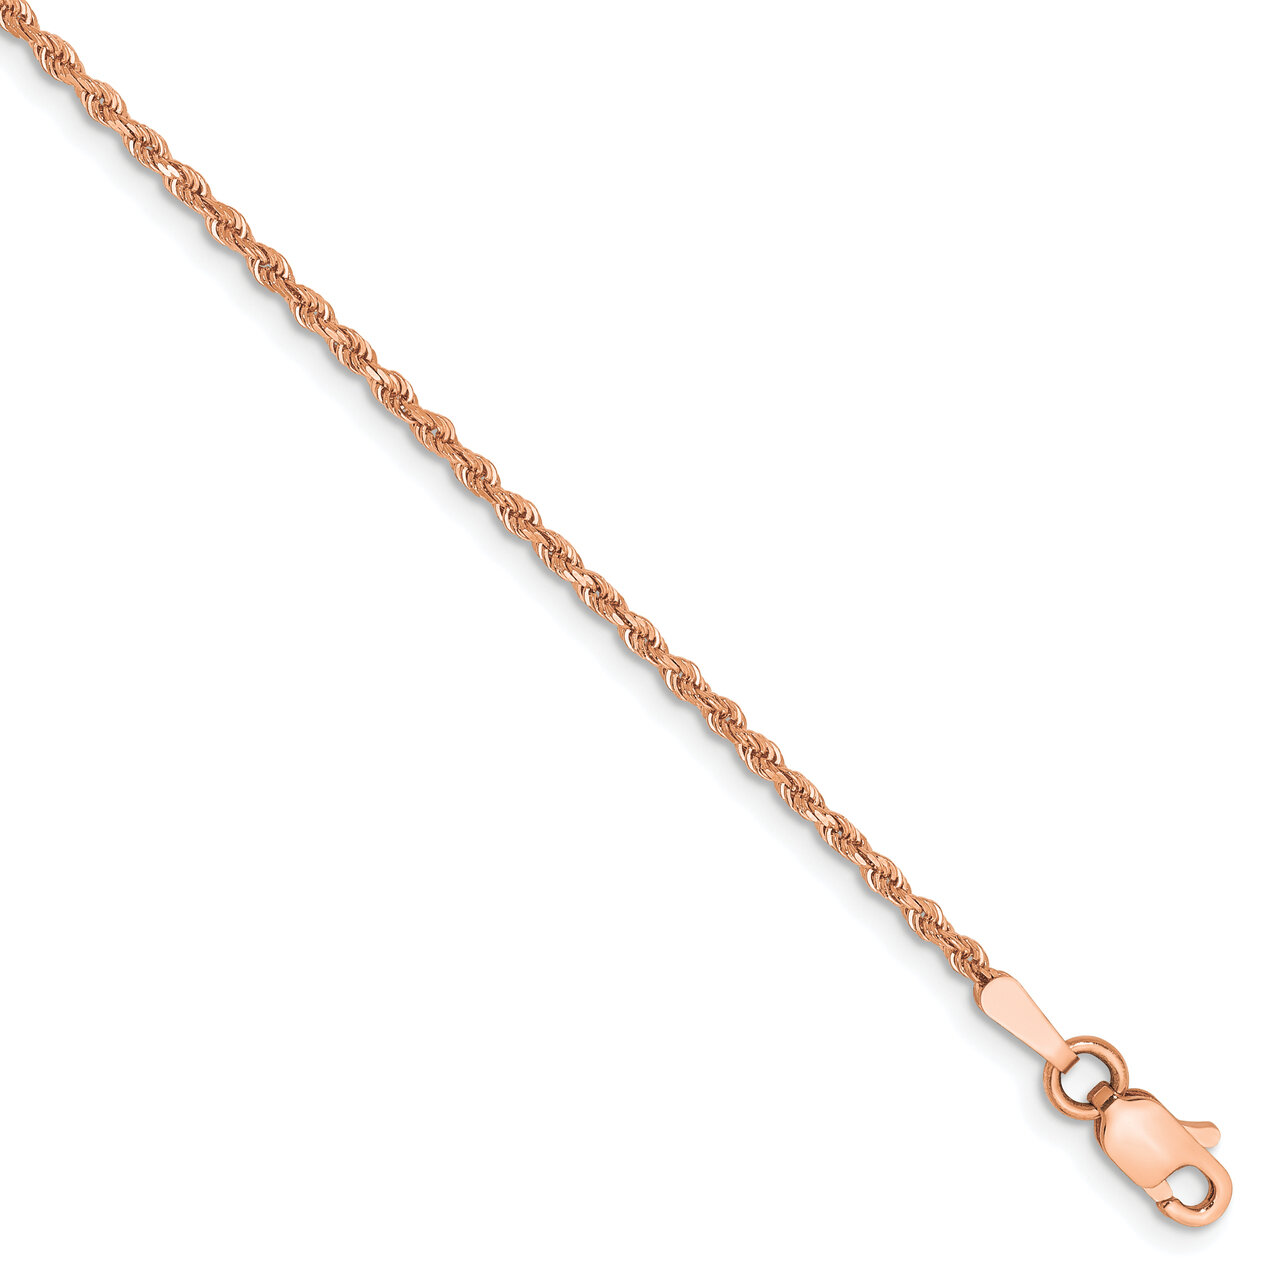 7 Inch 1.50mm Diamond-cut Rope with Lobster Clasp Chain 14k Rose Gold 012R-7